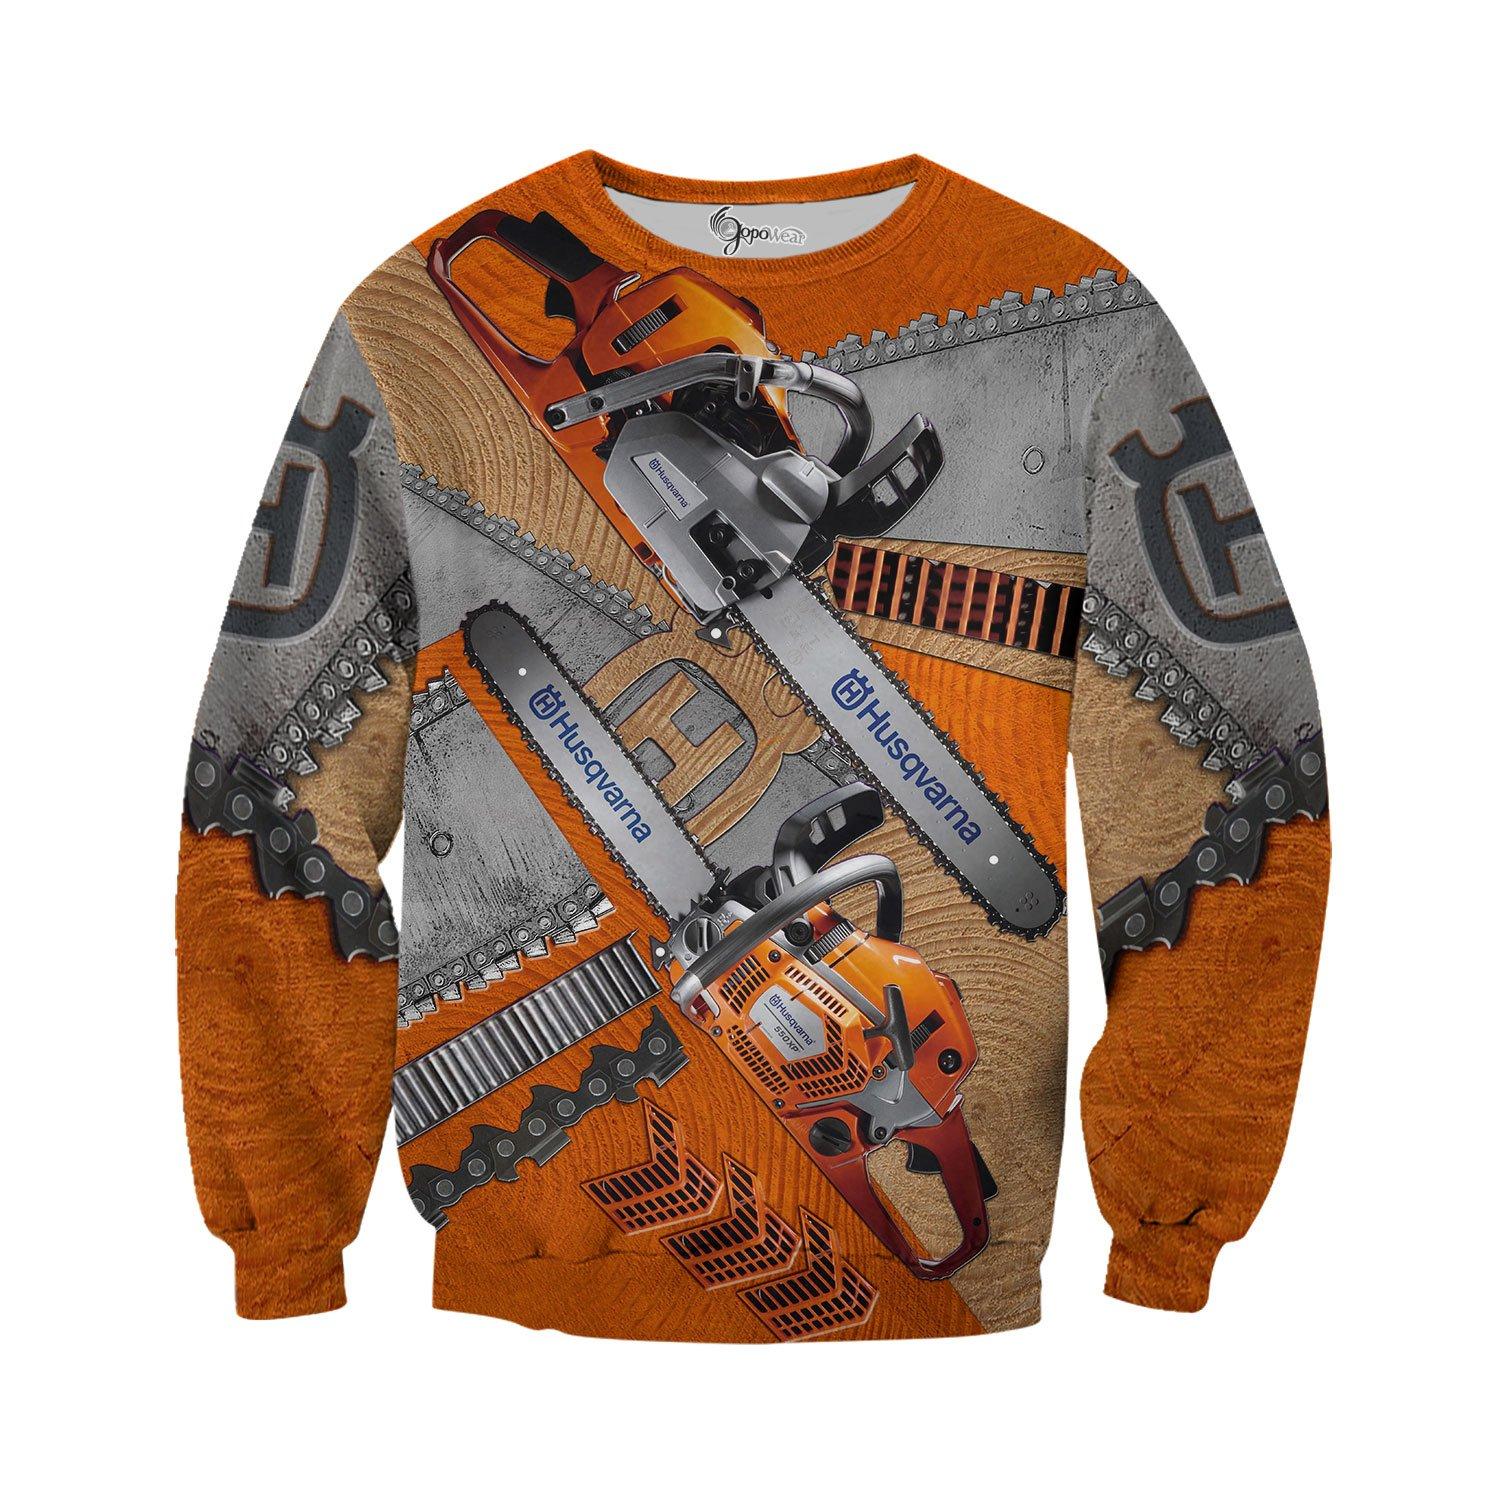 Husqvarna chainsaw 3d all over printed long-sleeved shirt